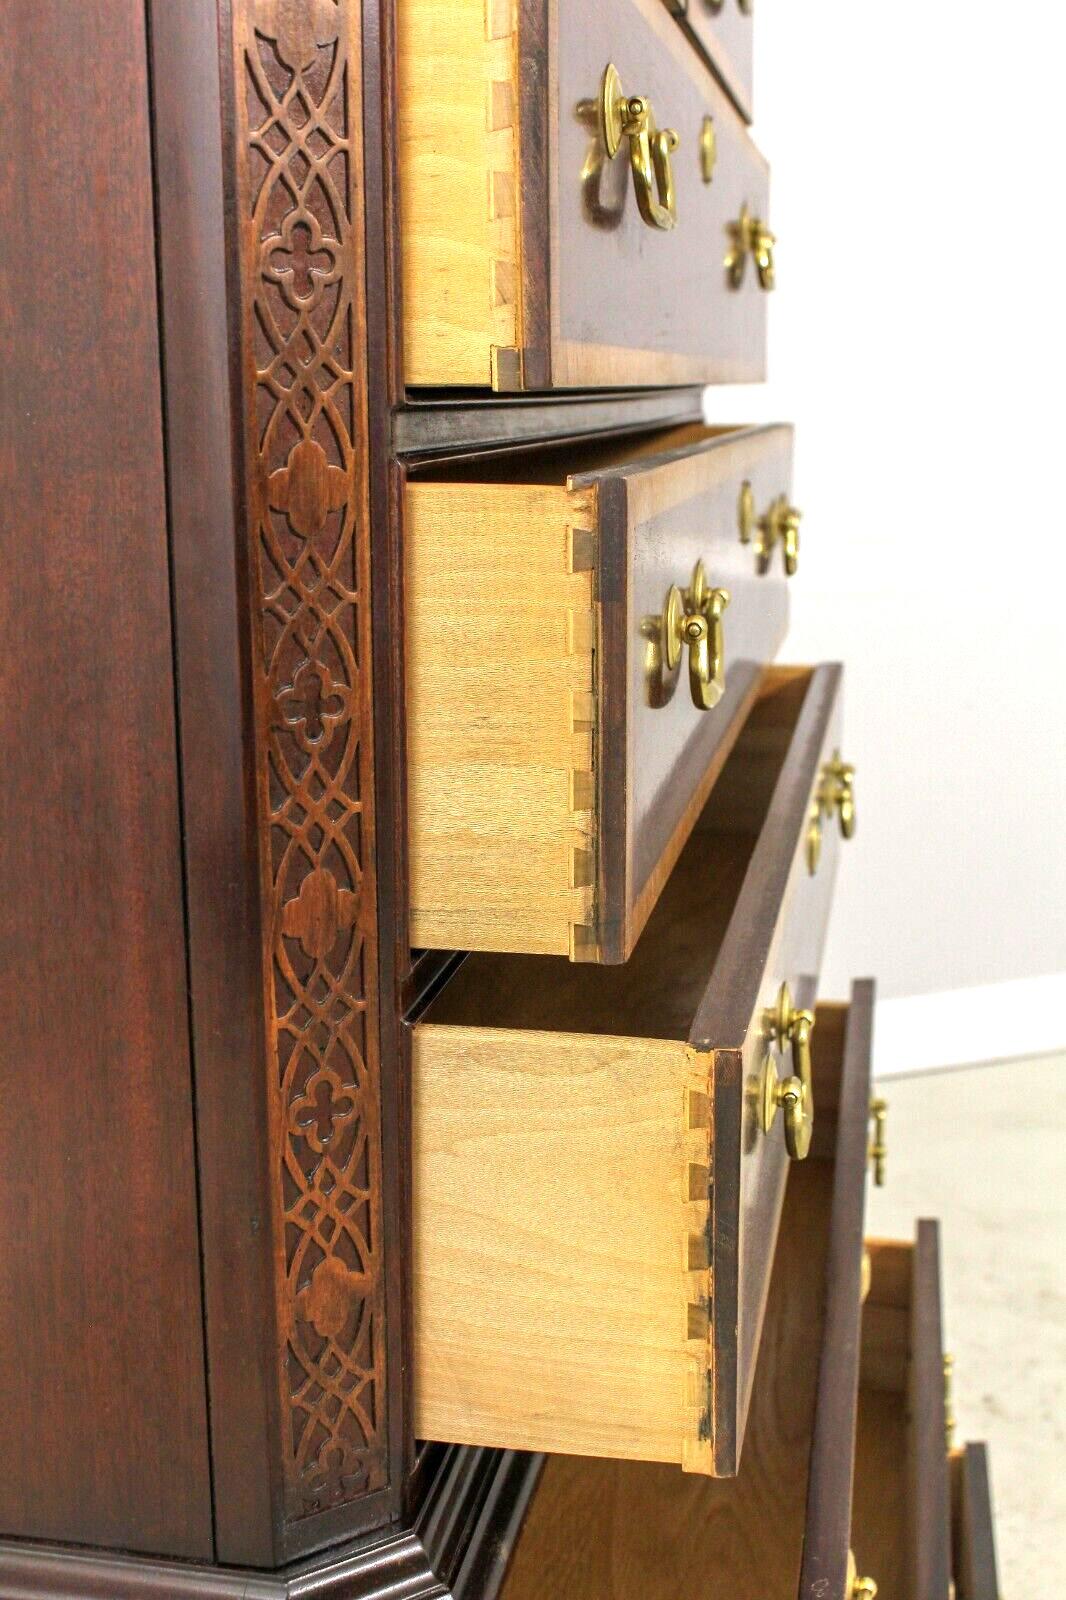 highboy chest of drawers